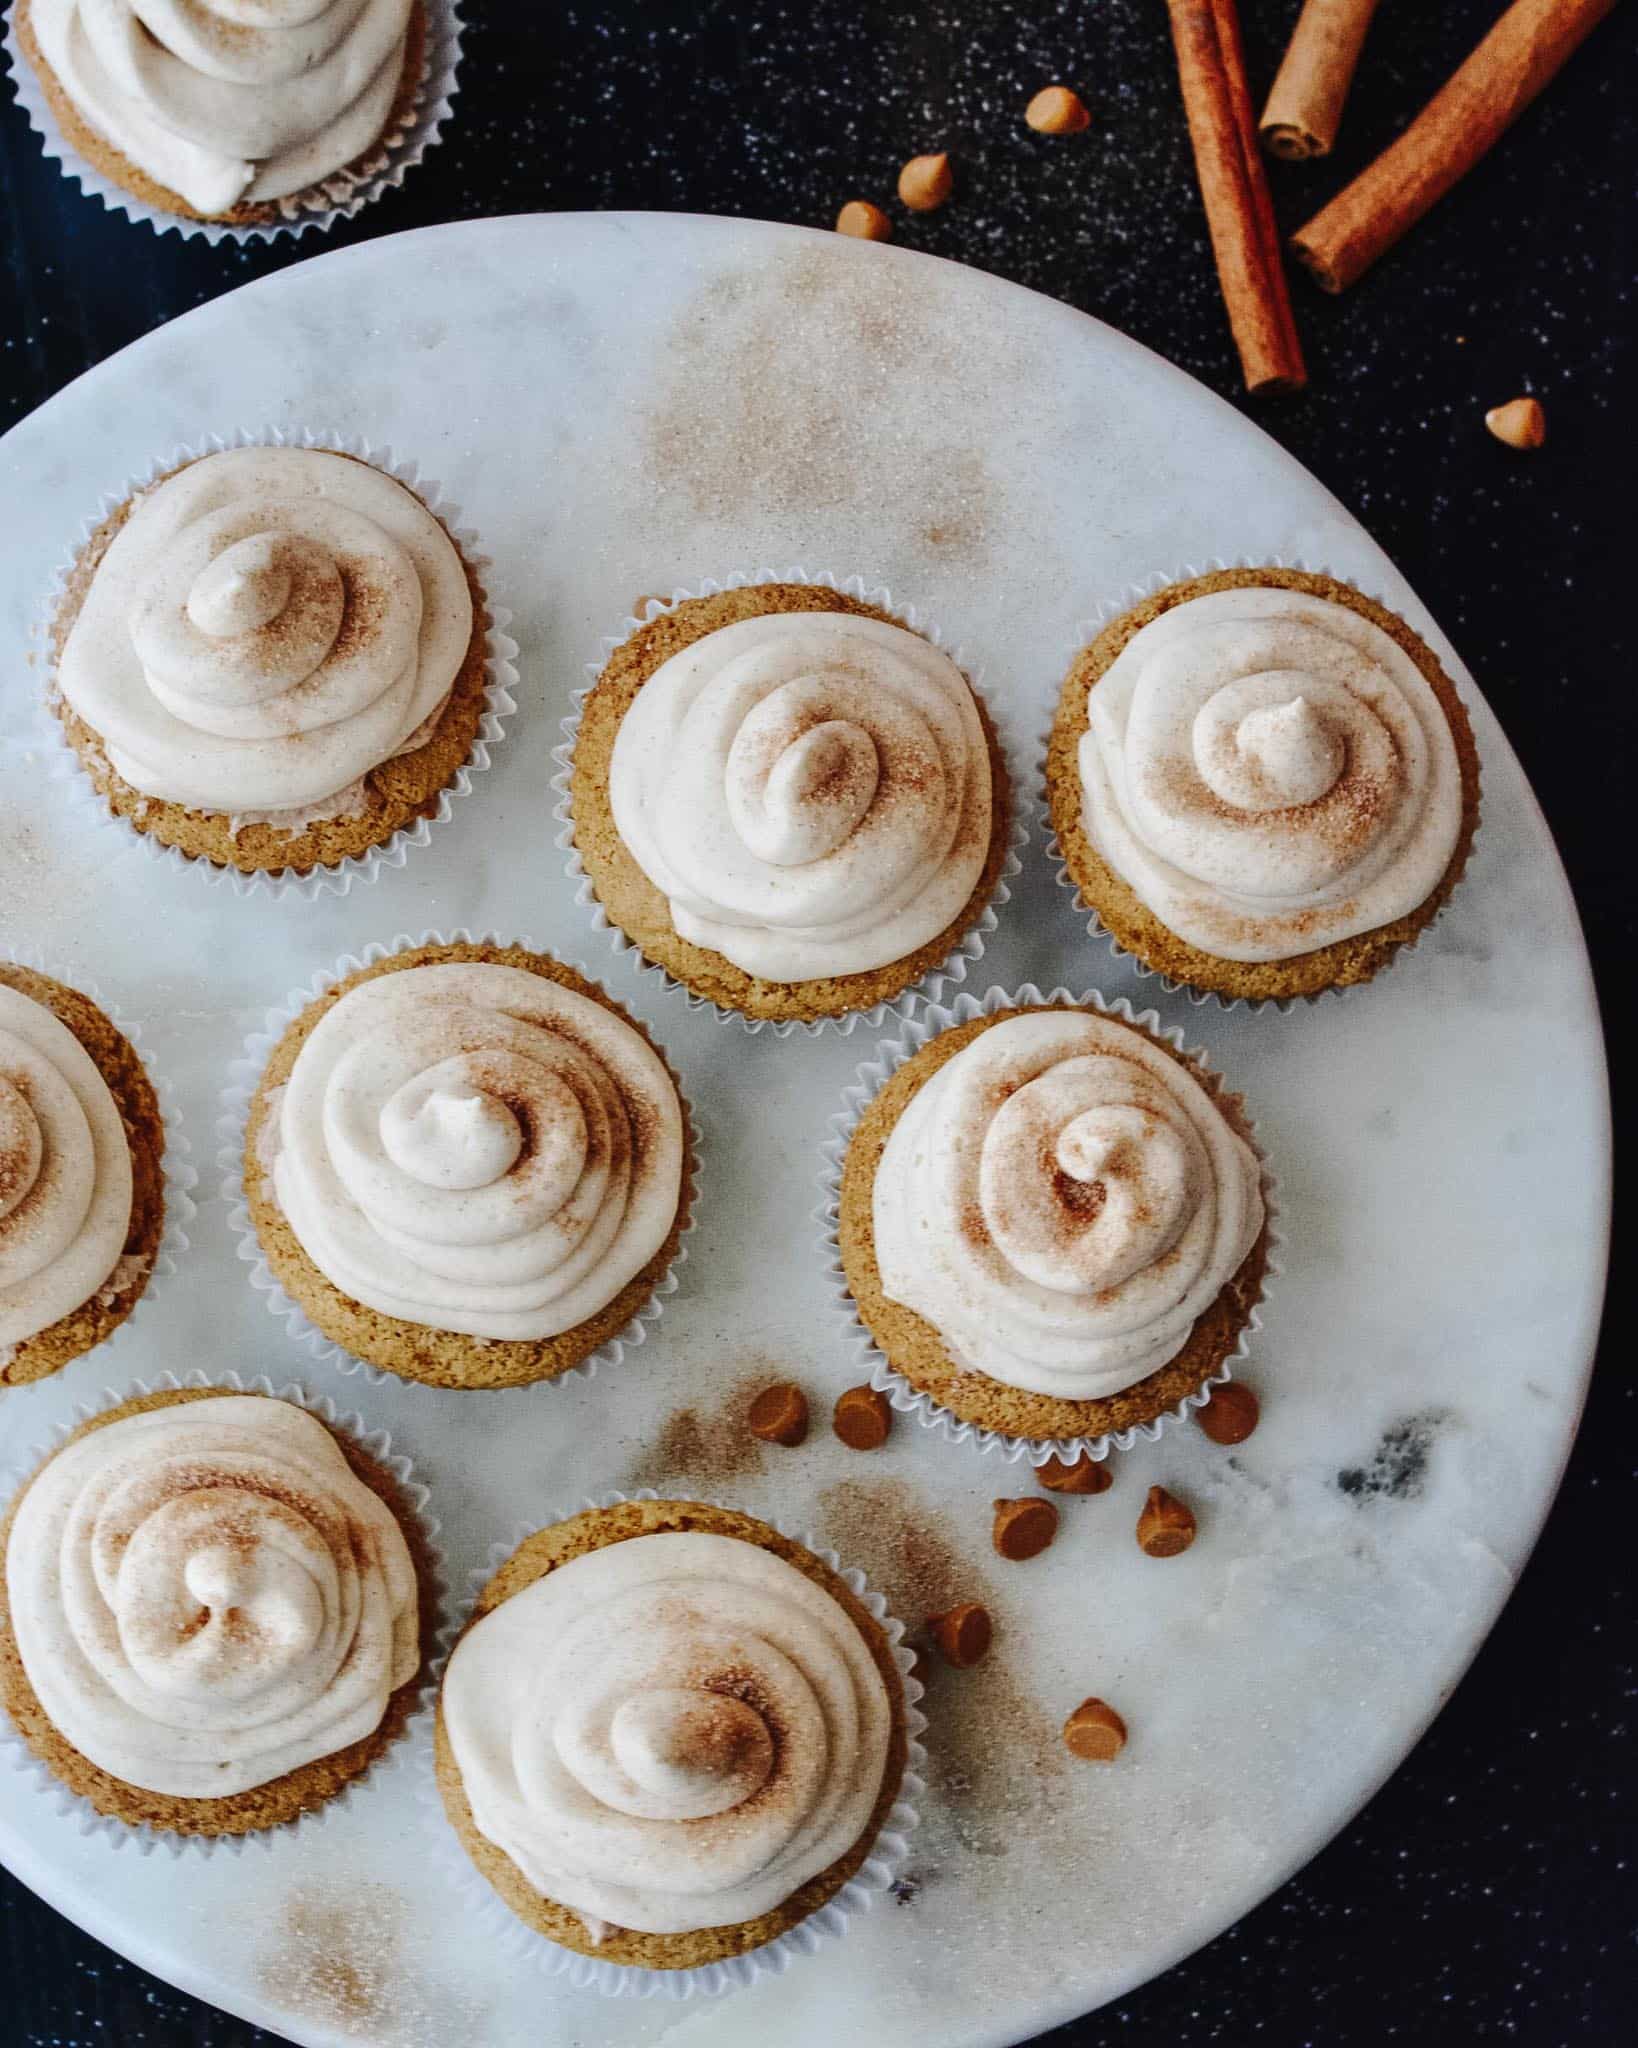 Butterscotch Cupcakes and Cinnamon Cream Cheese Frosting - Lightly sweet cupcakes made with melted butterscotch chips and topped with a simple cinnamon frosting. Perfect flavor combination, the ultimate fall flavor.